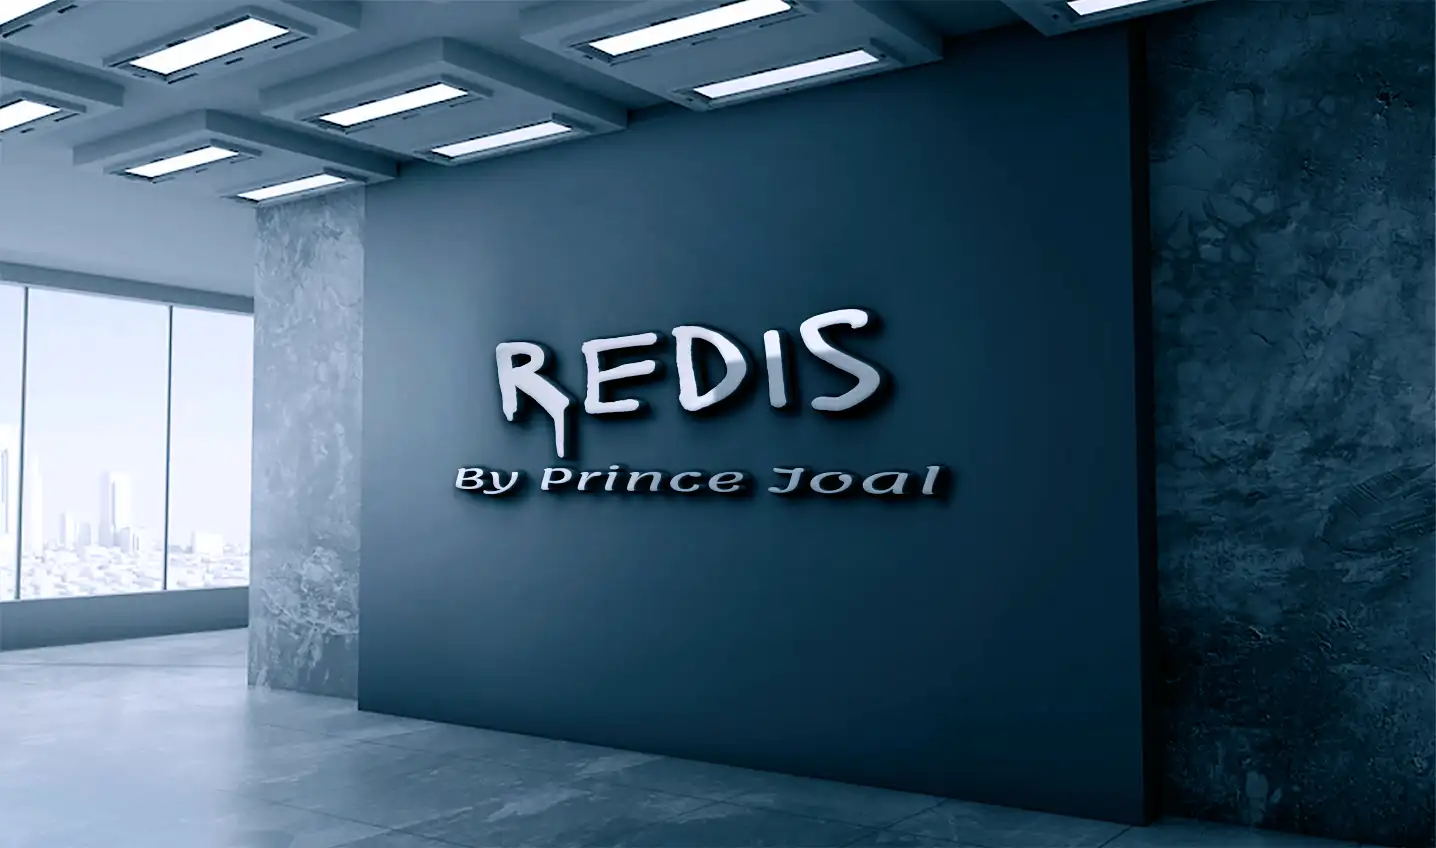 How to install multiple Redis on single server